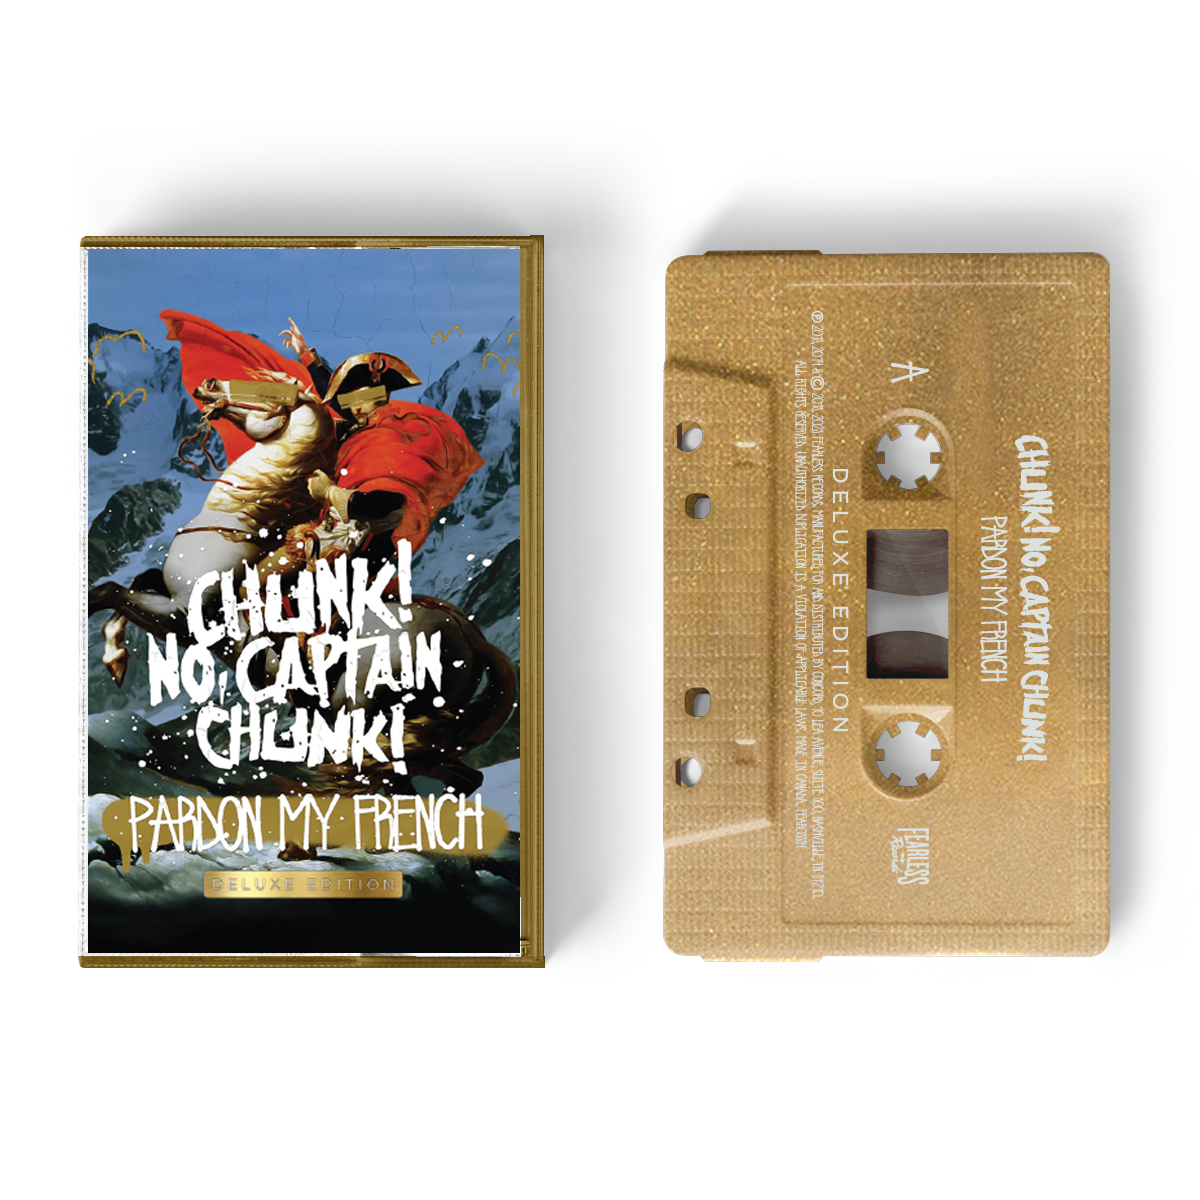 "Pardon My French (Deluxe Edition)" Metallic Gold Cassette